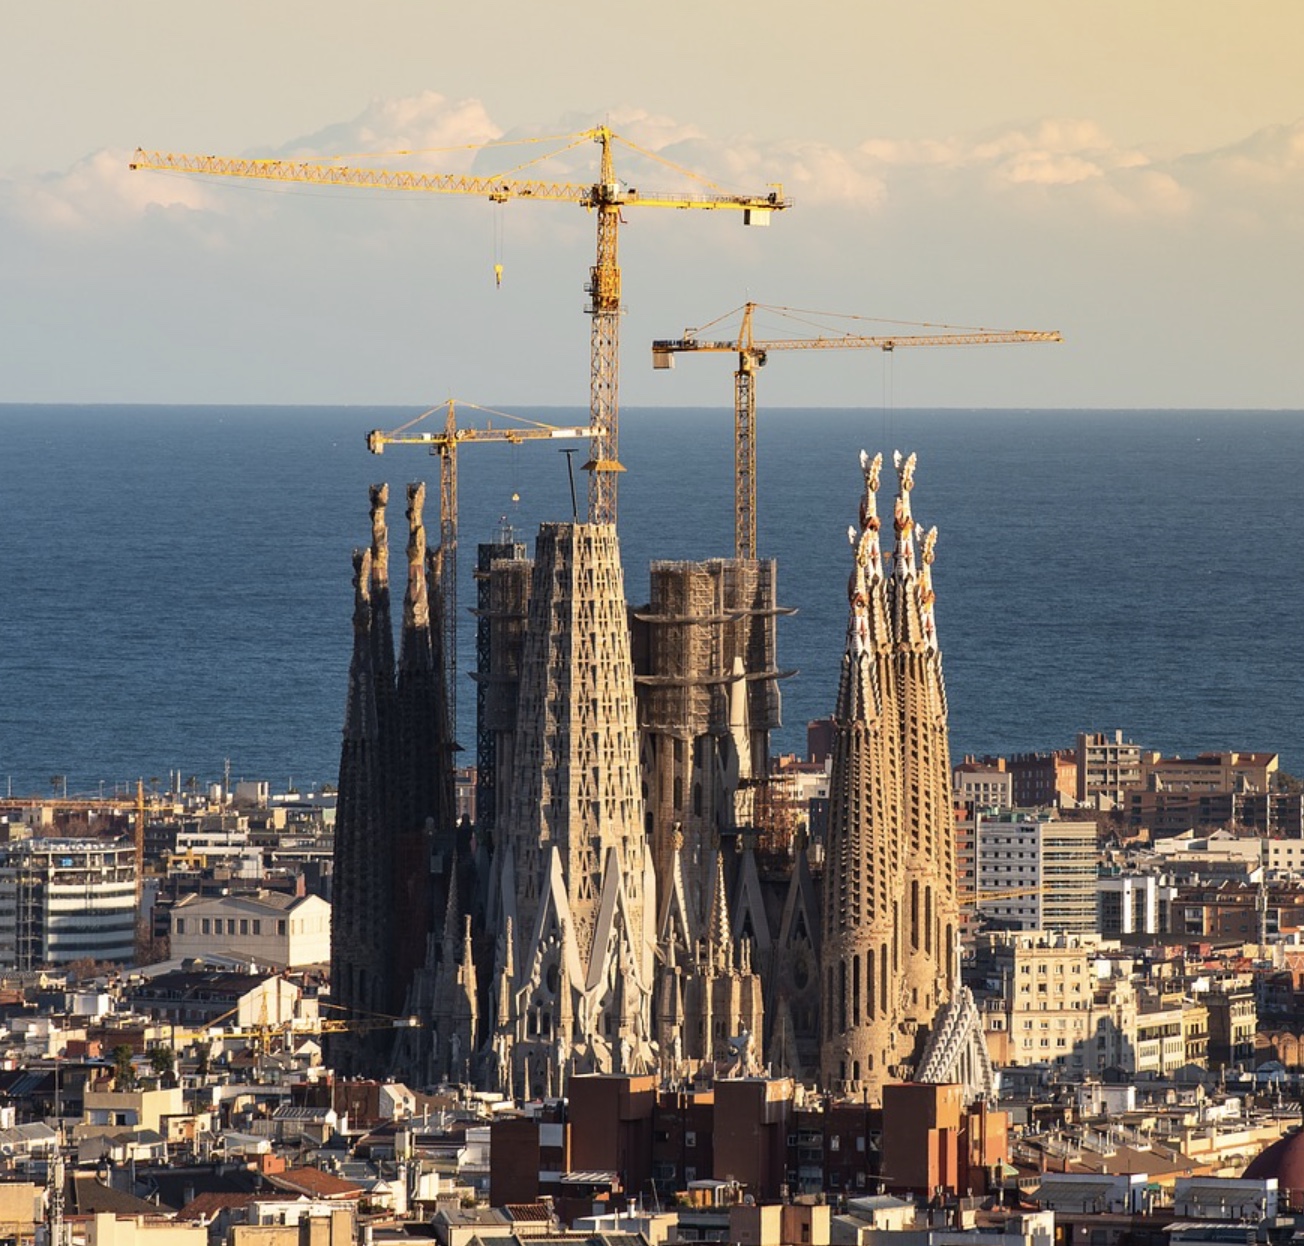 The Gaudi Cathedral in Barcelona